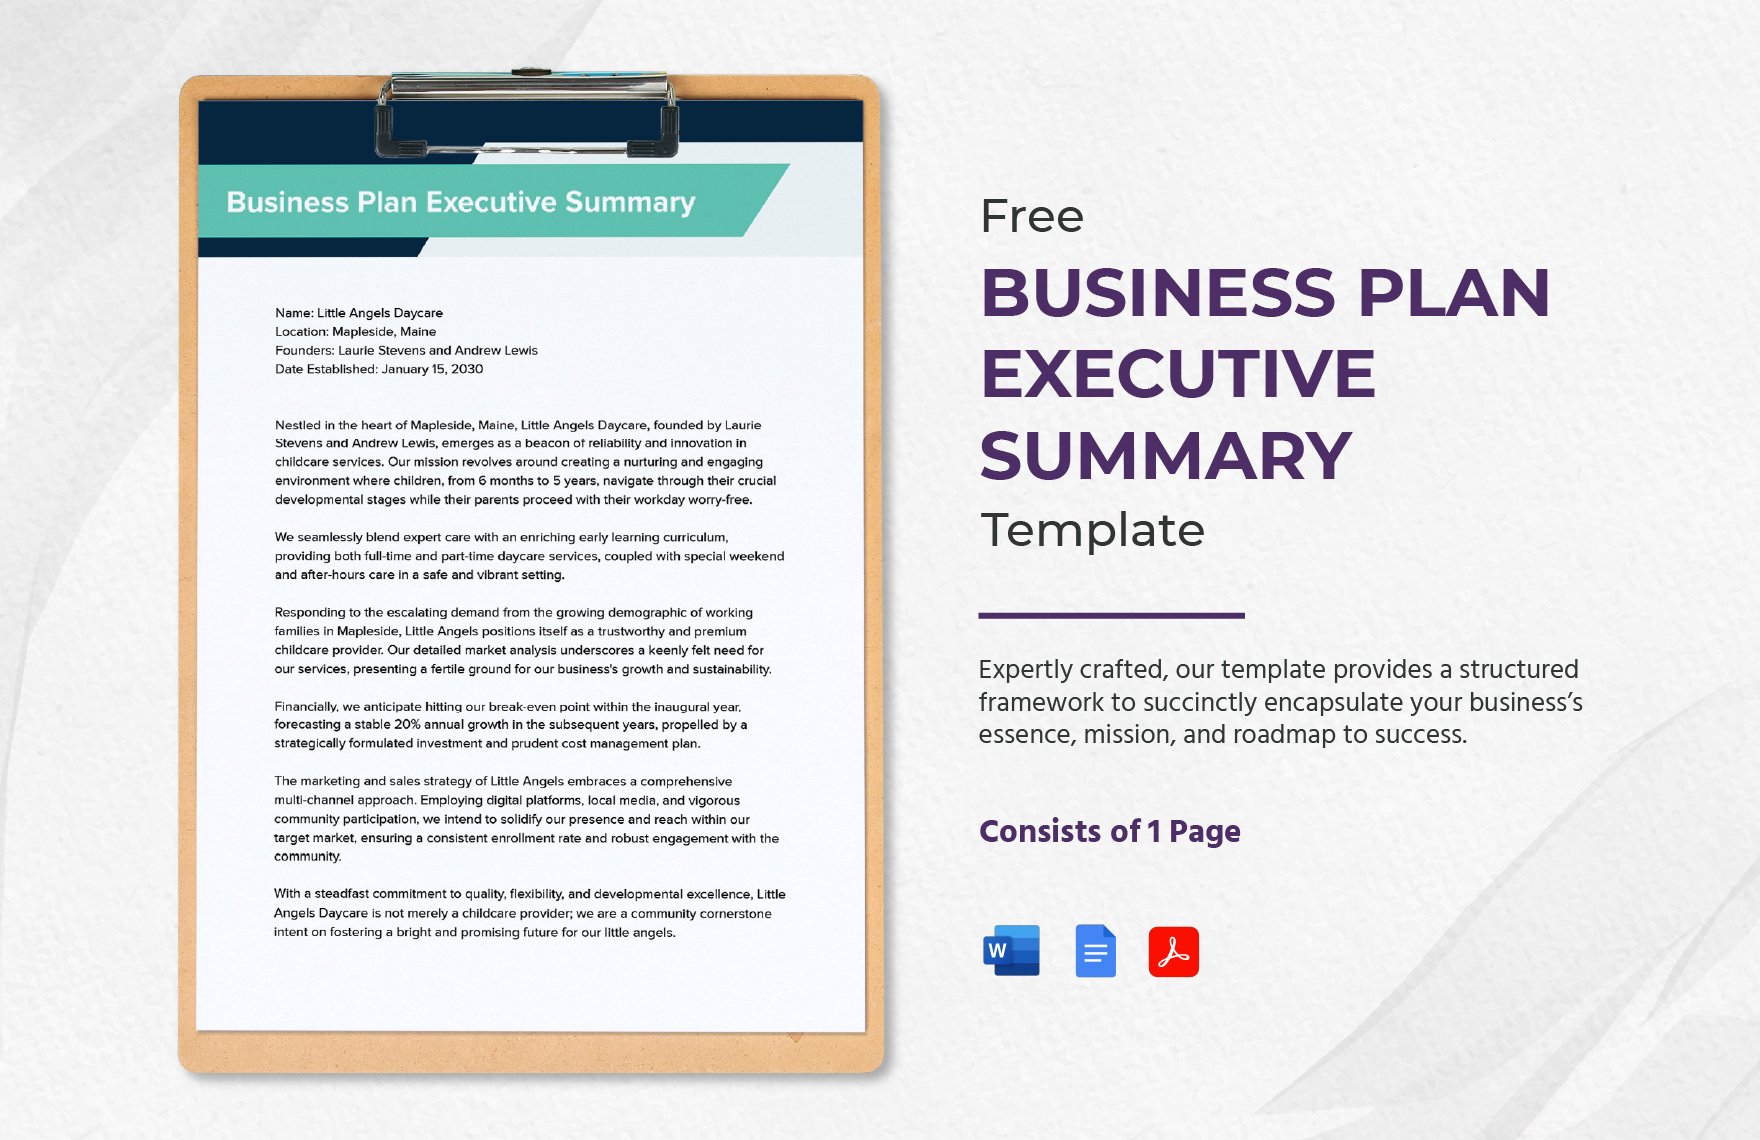 Business Plan Executive Summary Template in Word, Google Docs, PDF